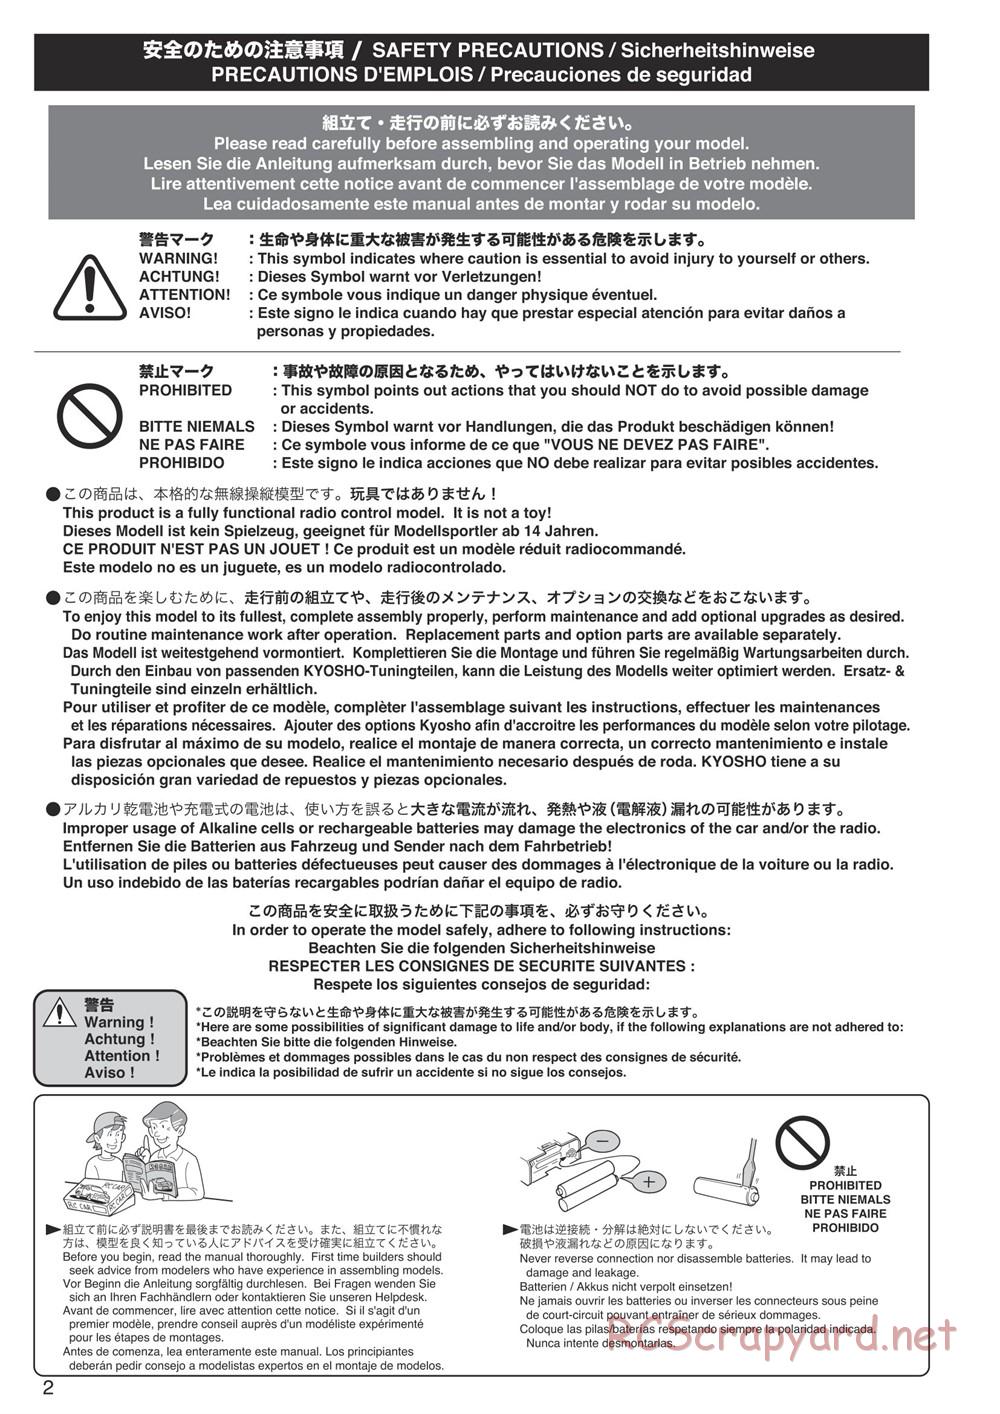 Kyosho - DMT - Manual - Page 2